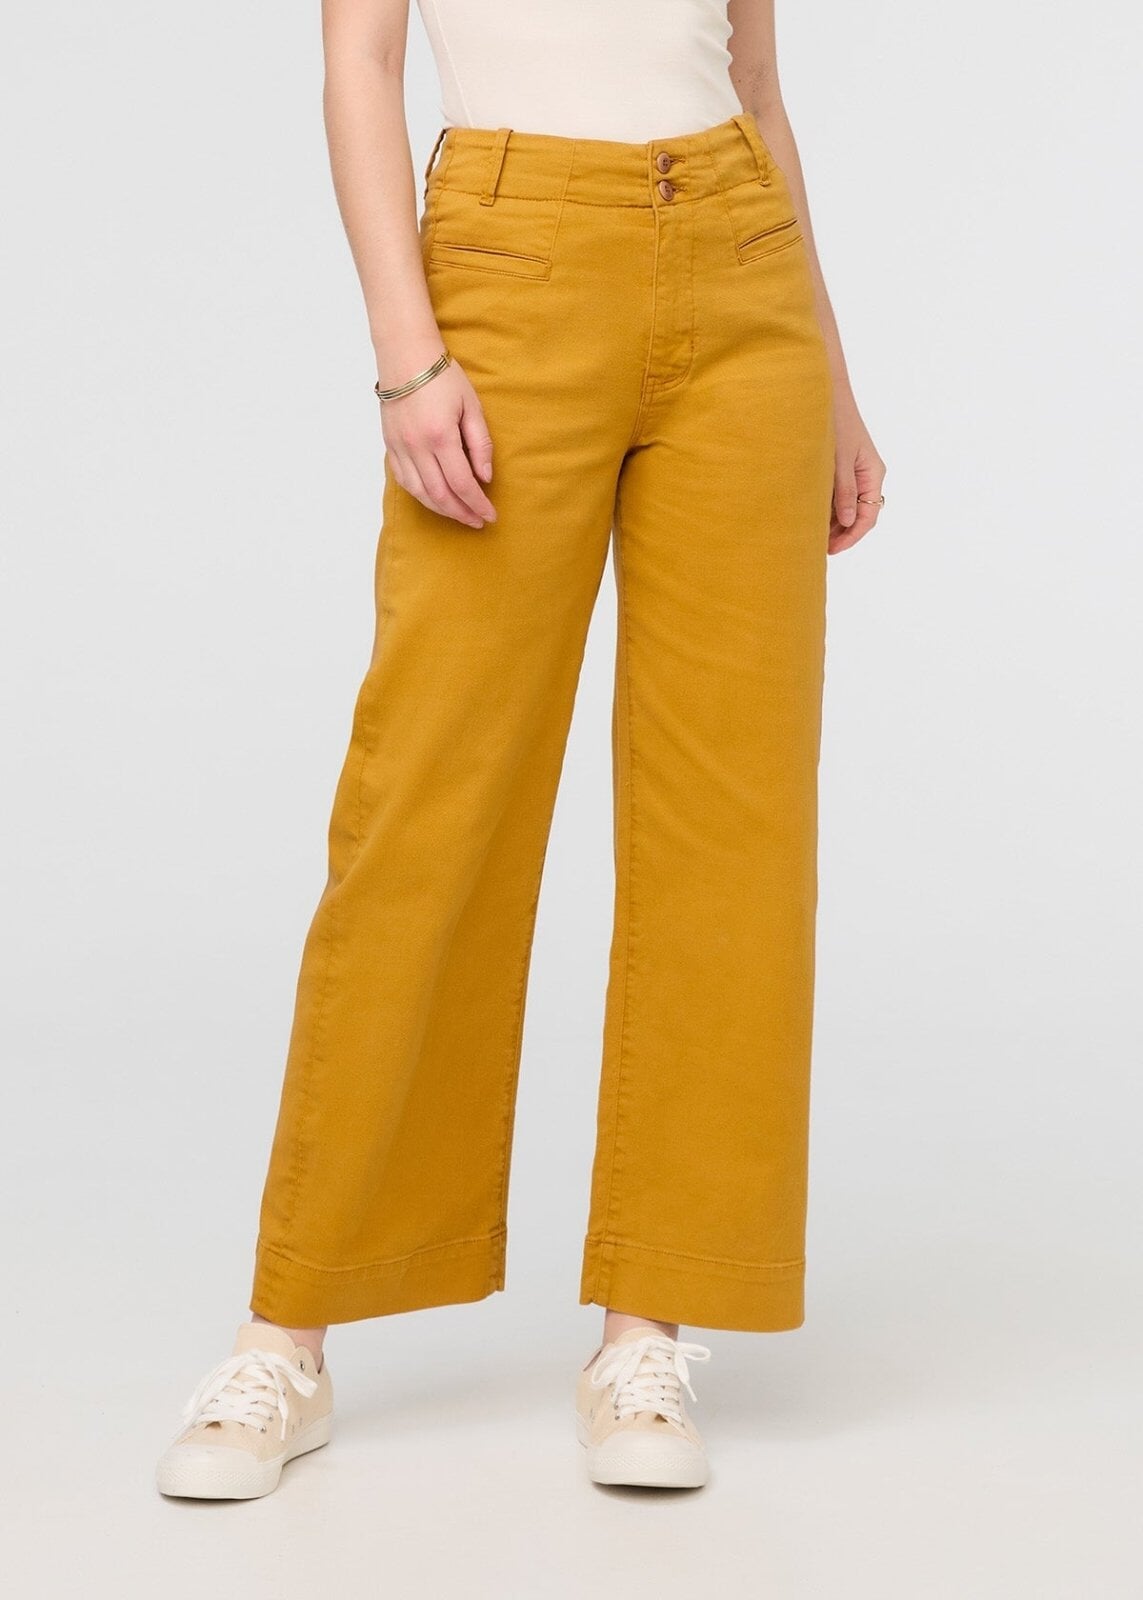 Women's Stretch Pants - Performance by DUER